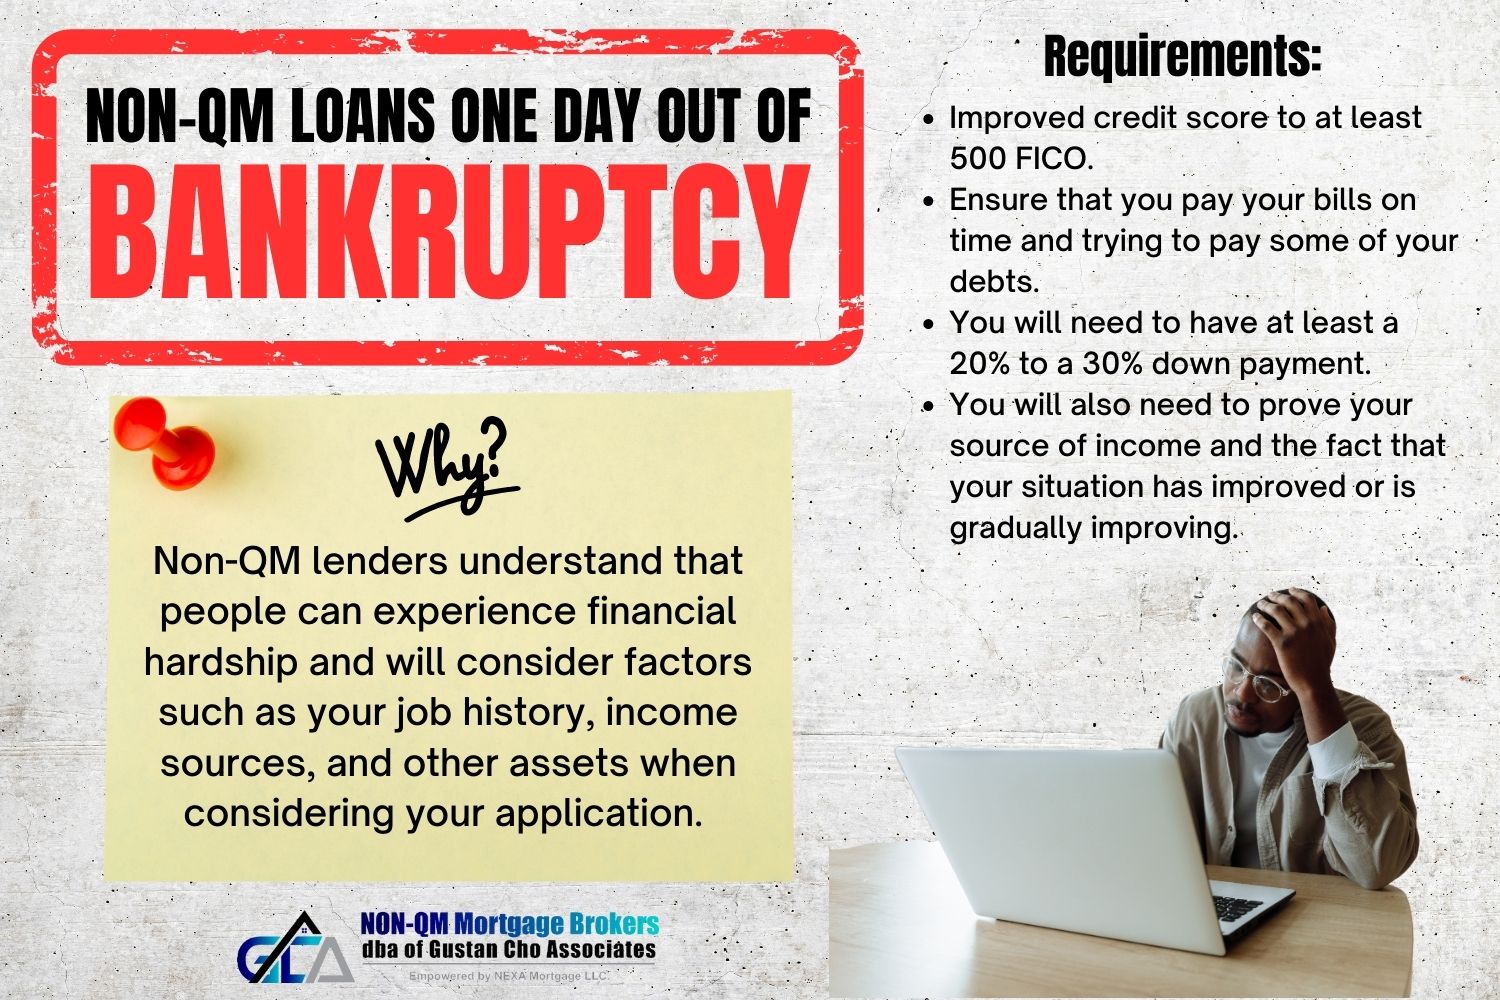 NON-QM LOANS ONE DAY OUT OF BANKRUPTCY